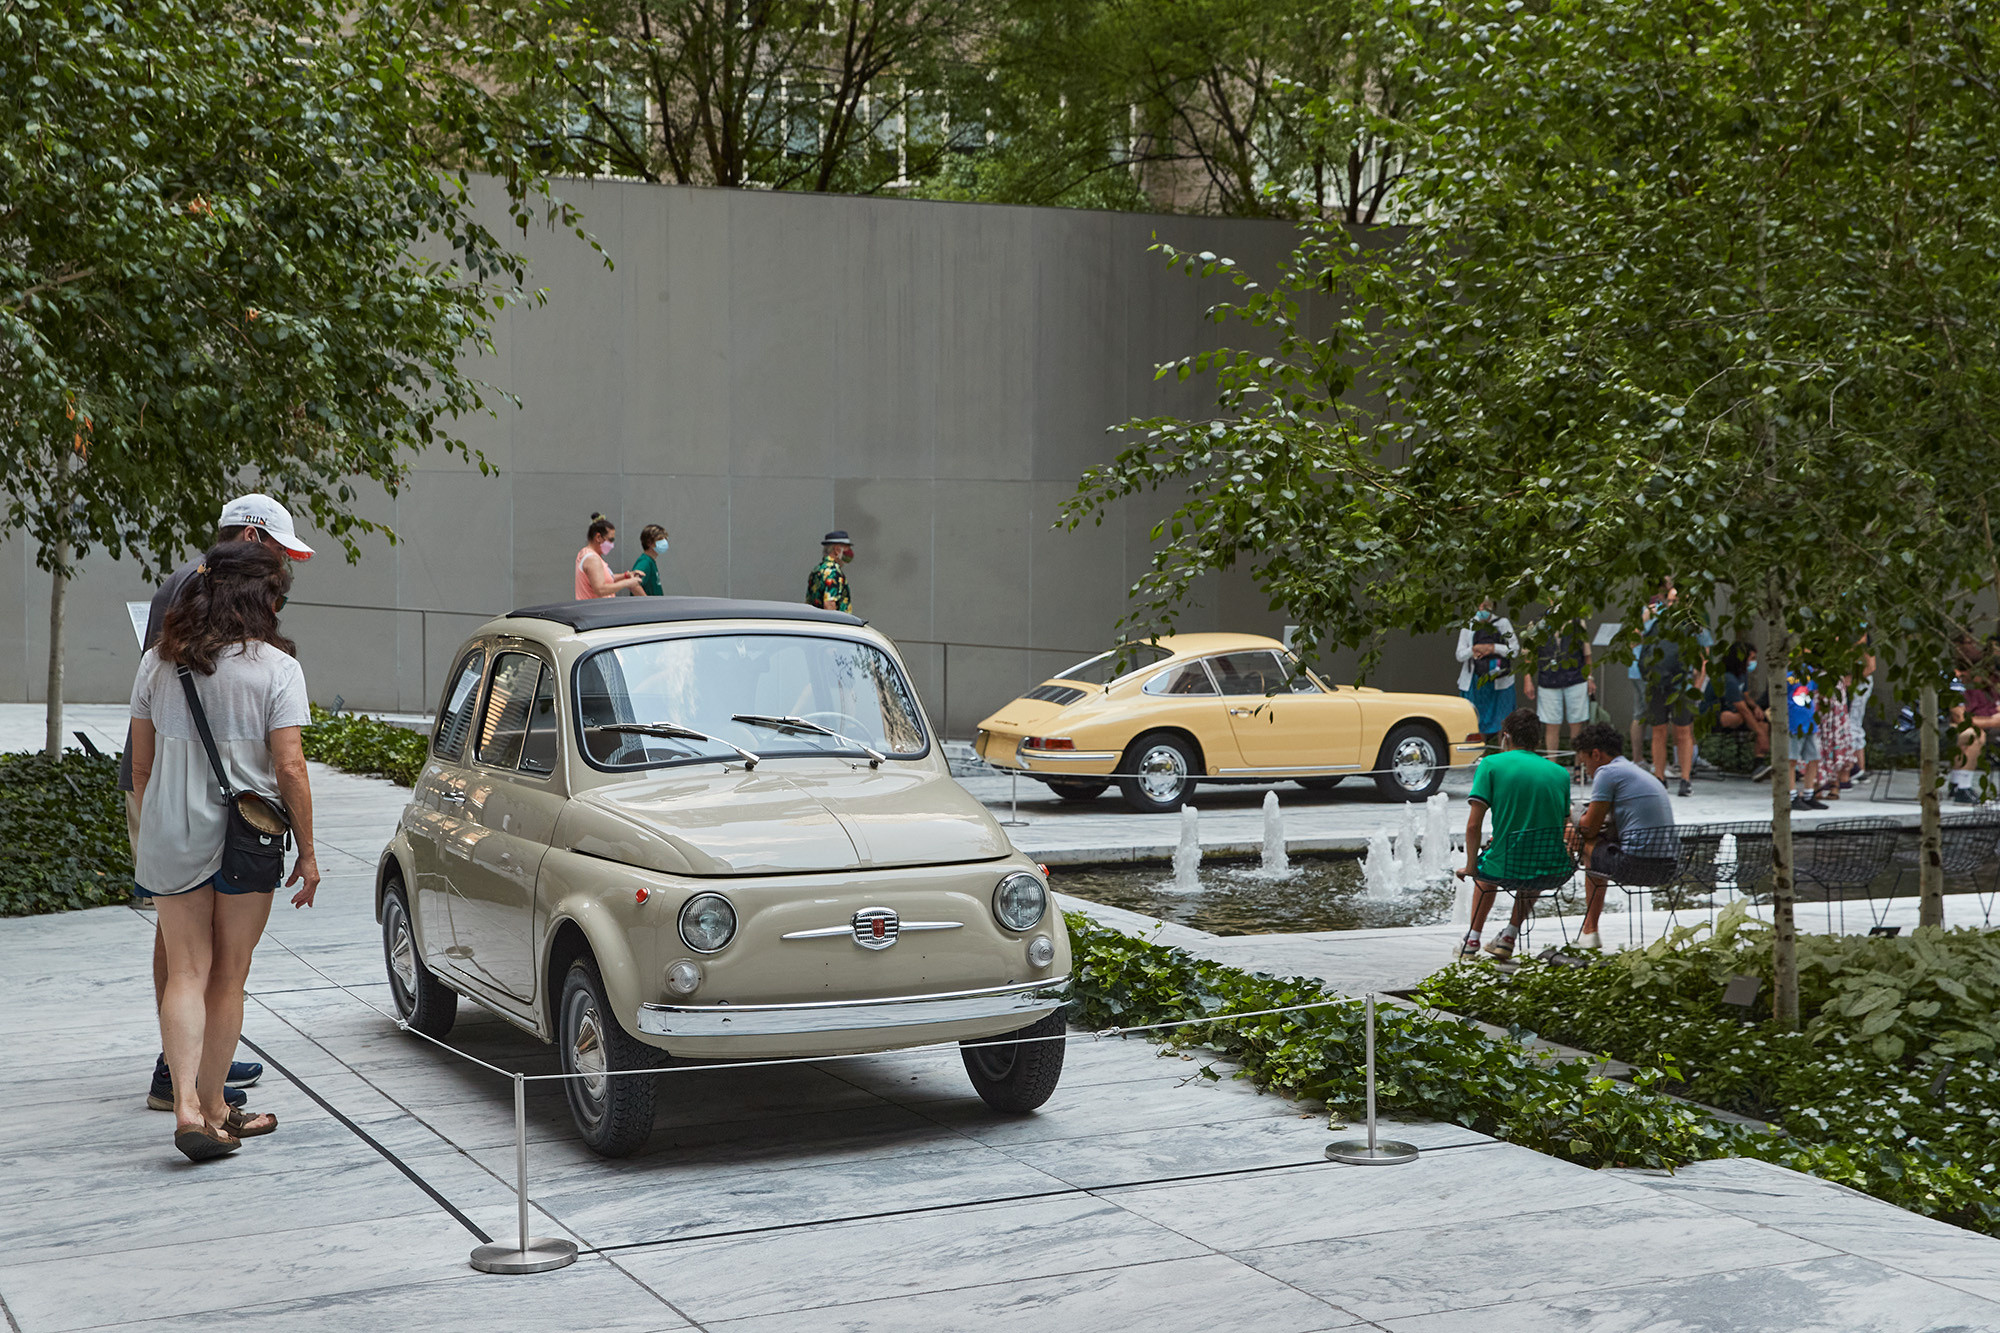 Installation view of Automania from the Abby Aldrich Rockefeller Sculpture Garden, The Museum of Modern Art, New York, July 4, 2021–January 2, 2022. Photo: Gus Powell